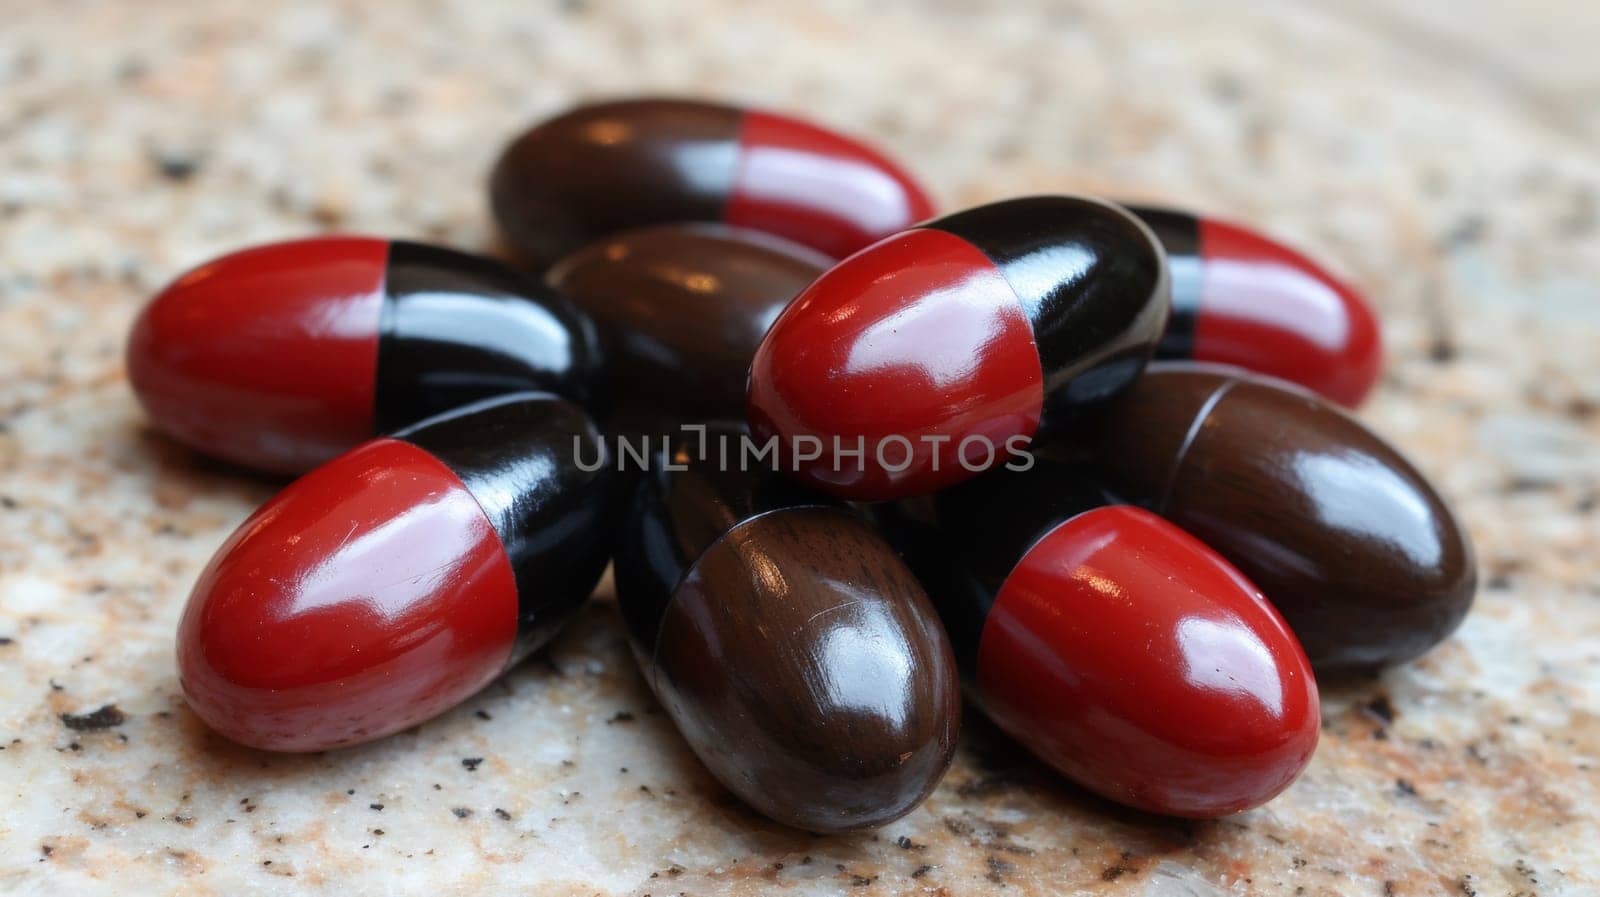 A bunch of pills are on a table with red and black caps, AI by starush